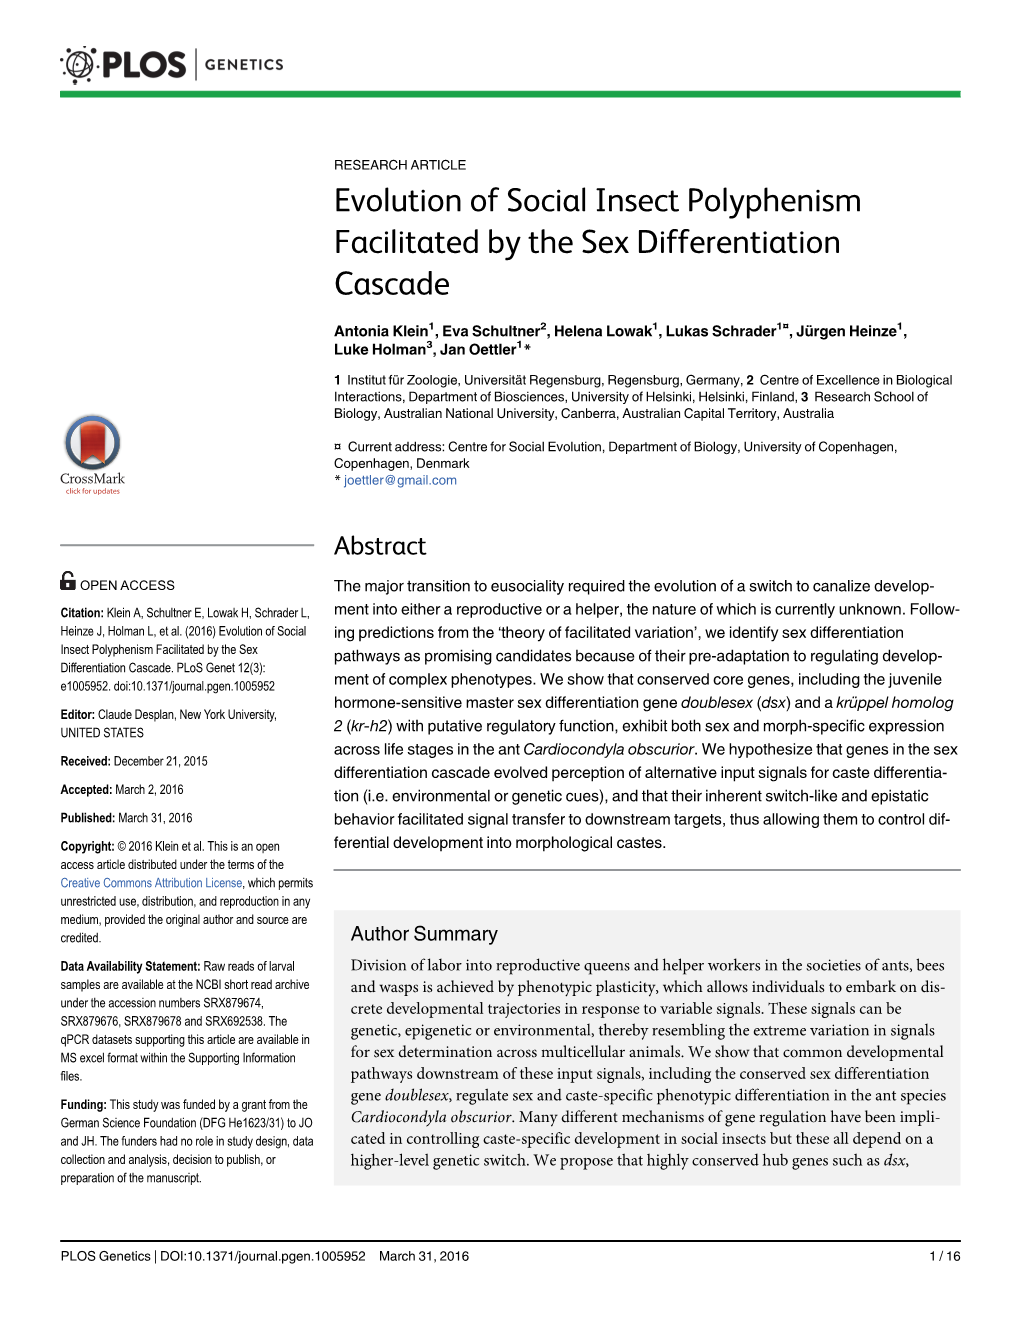 Evolution of Social Insect Polyphenism Facilitated by the Sex Differentiation Cascade